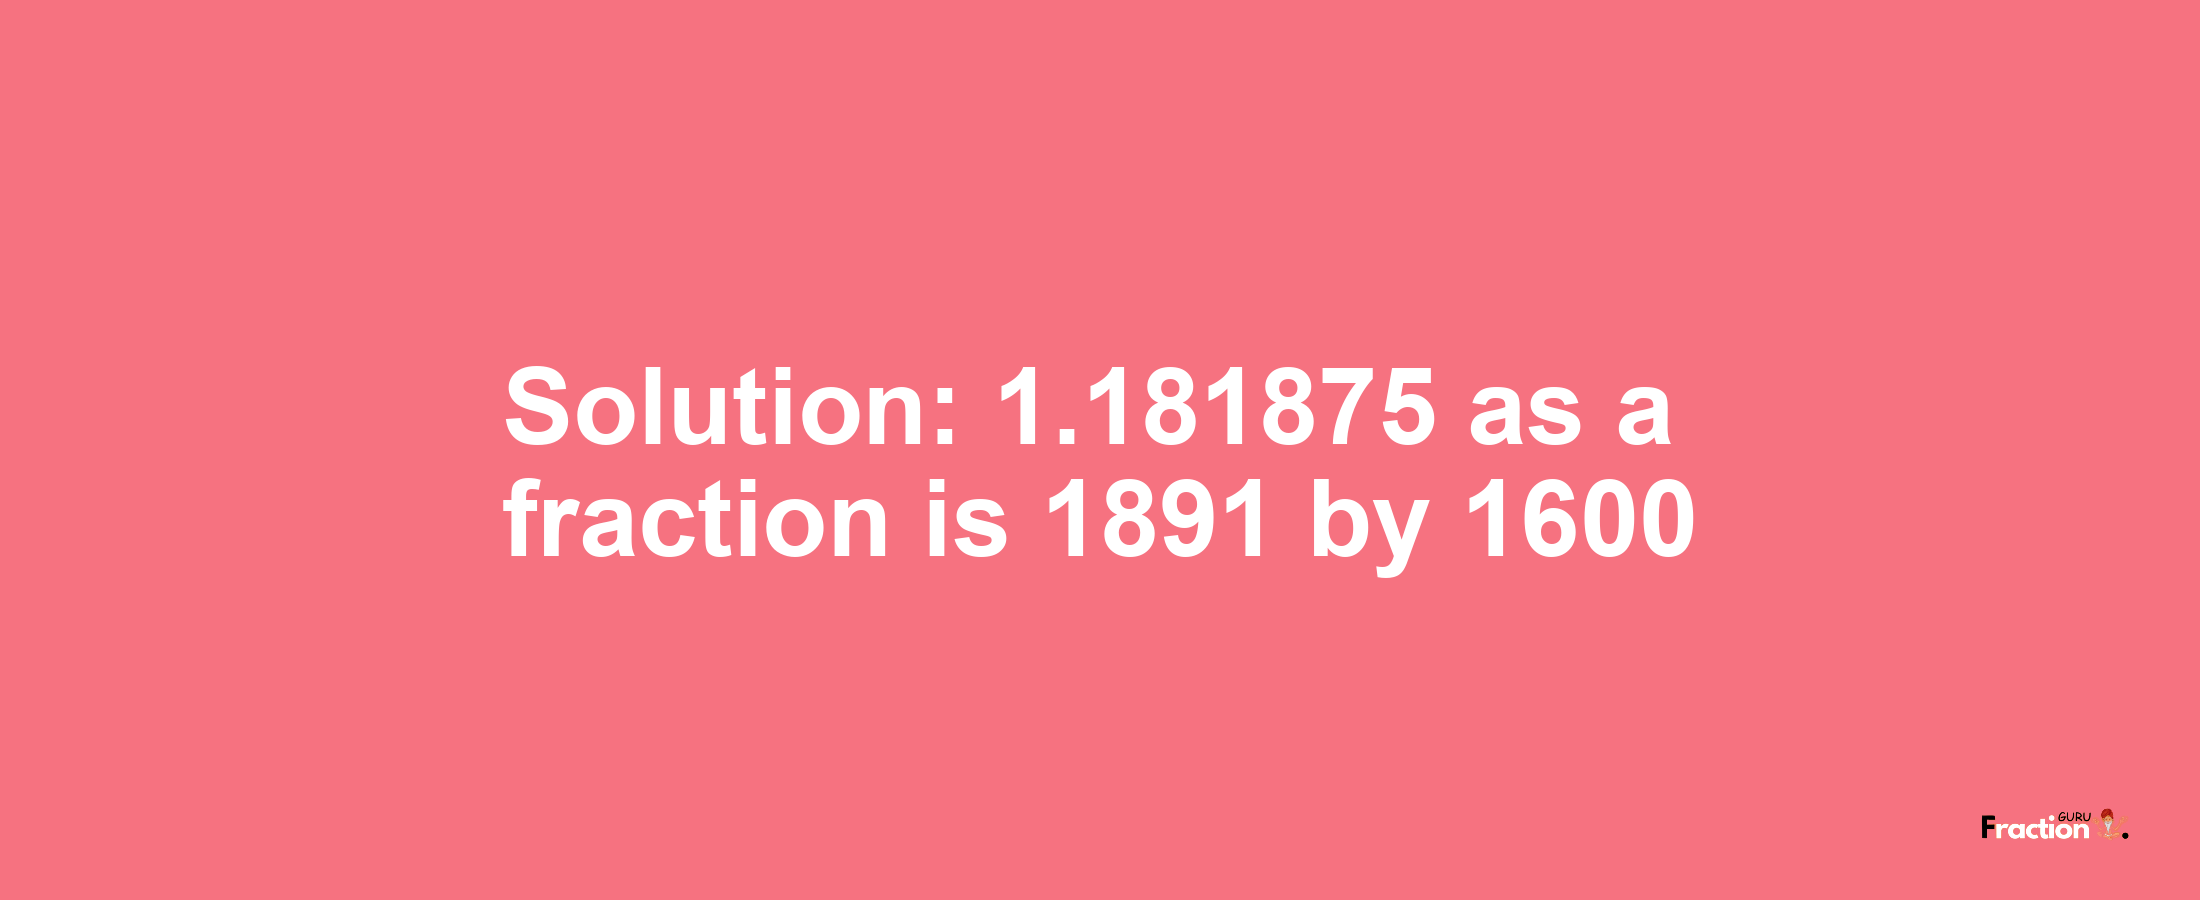 Solution:1.181875 as a fraction is 1891/1600